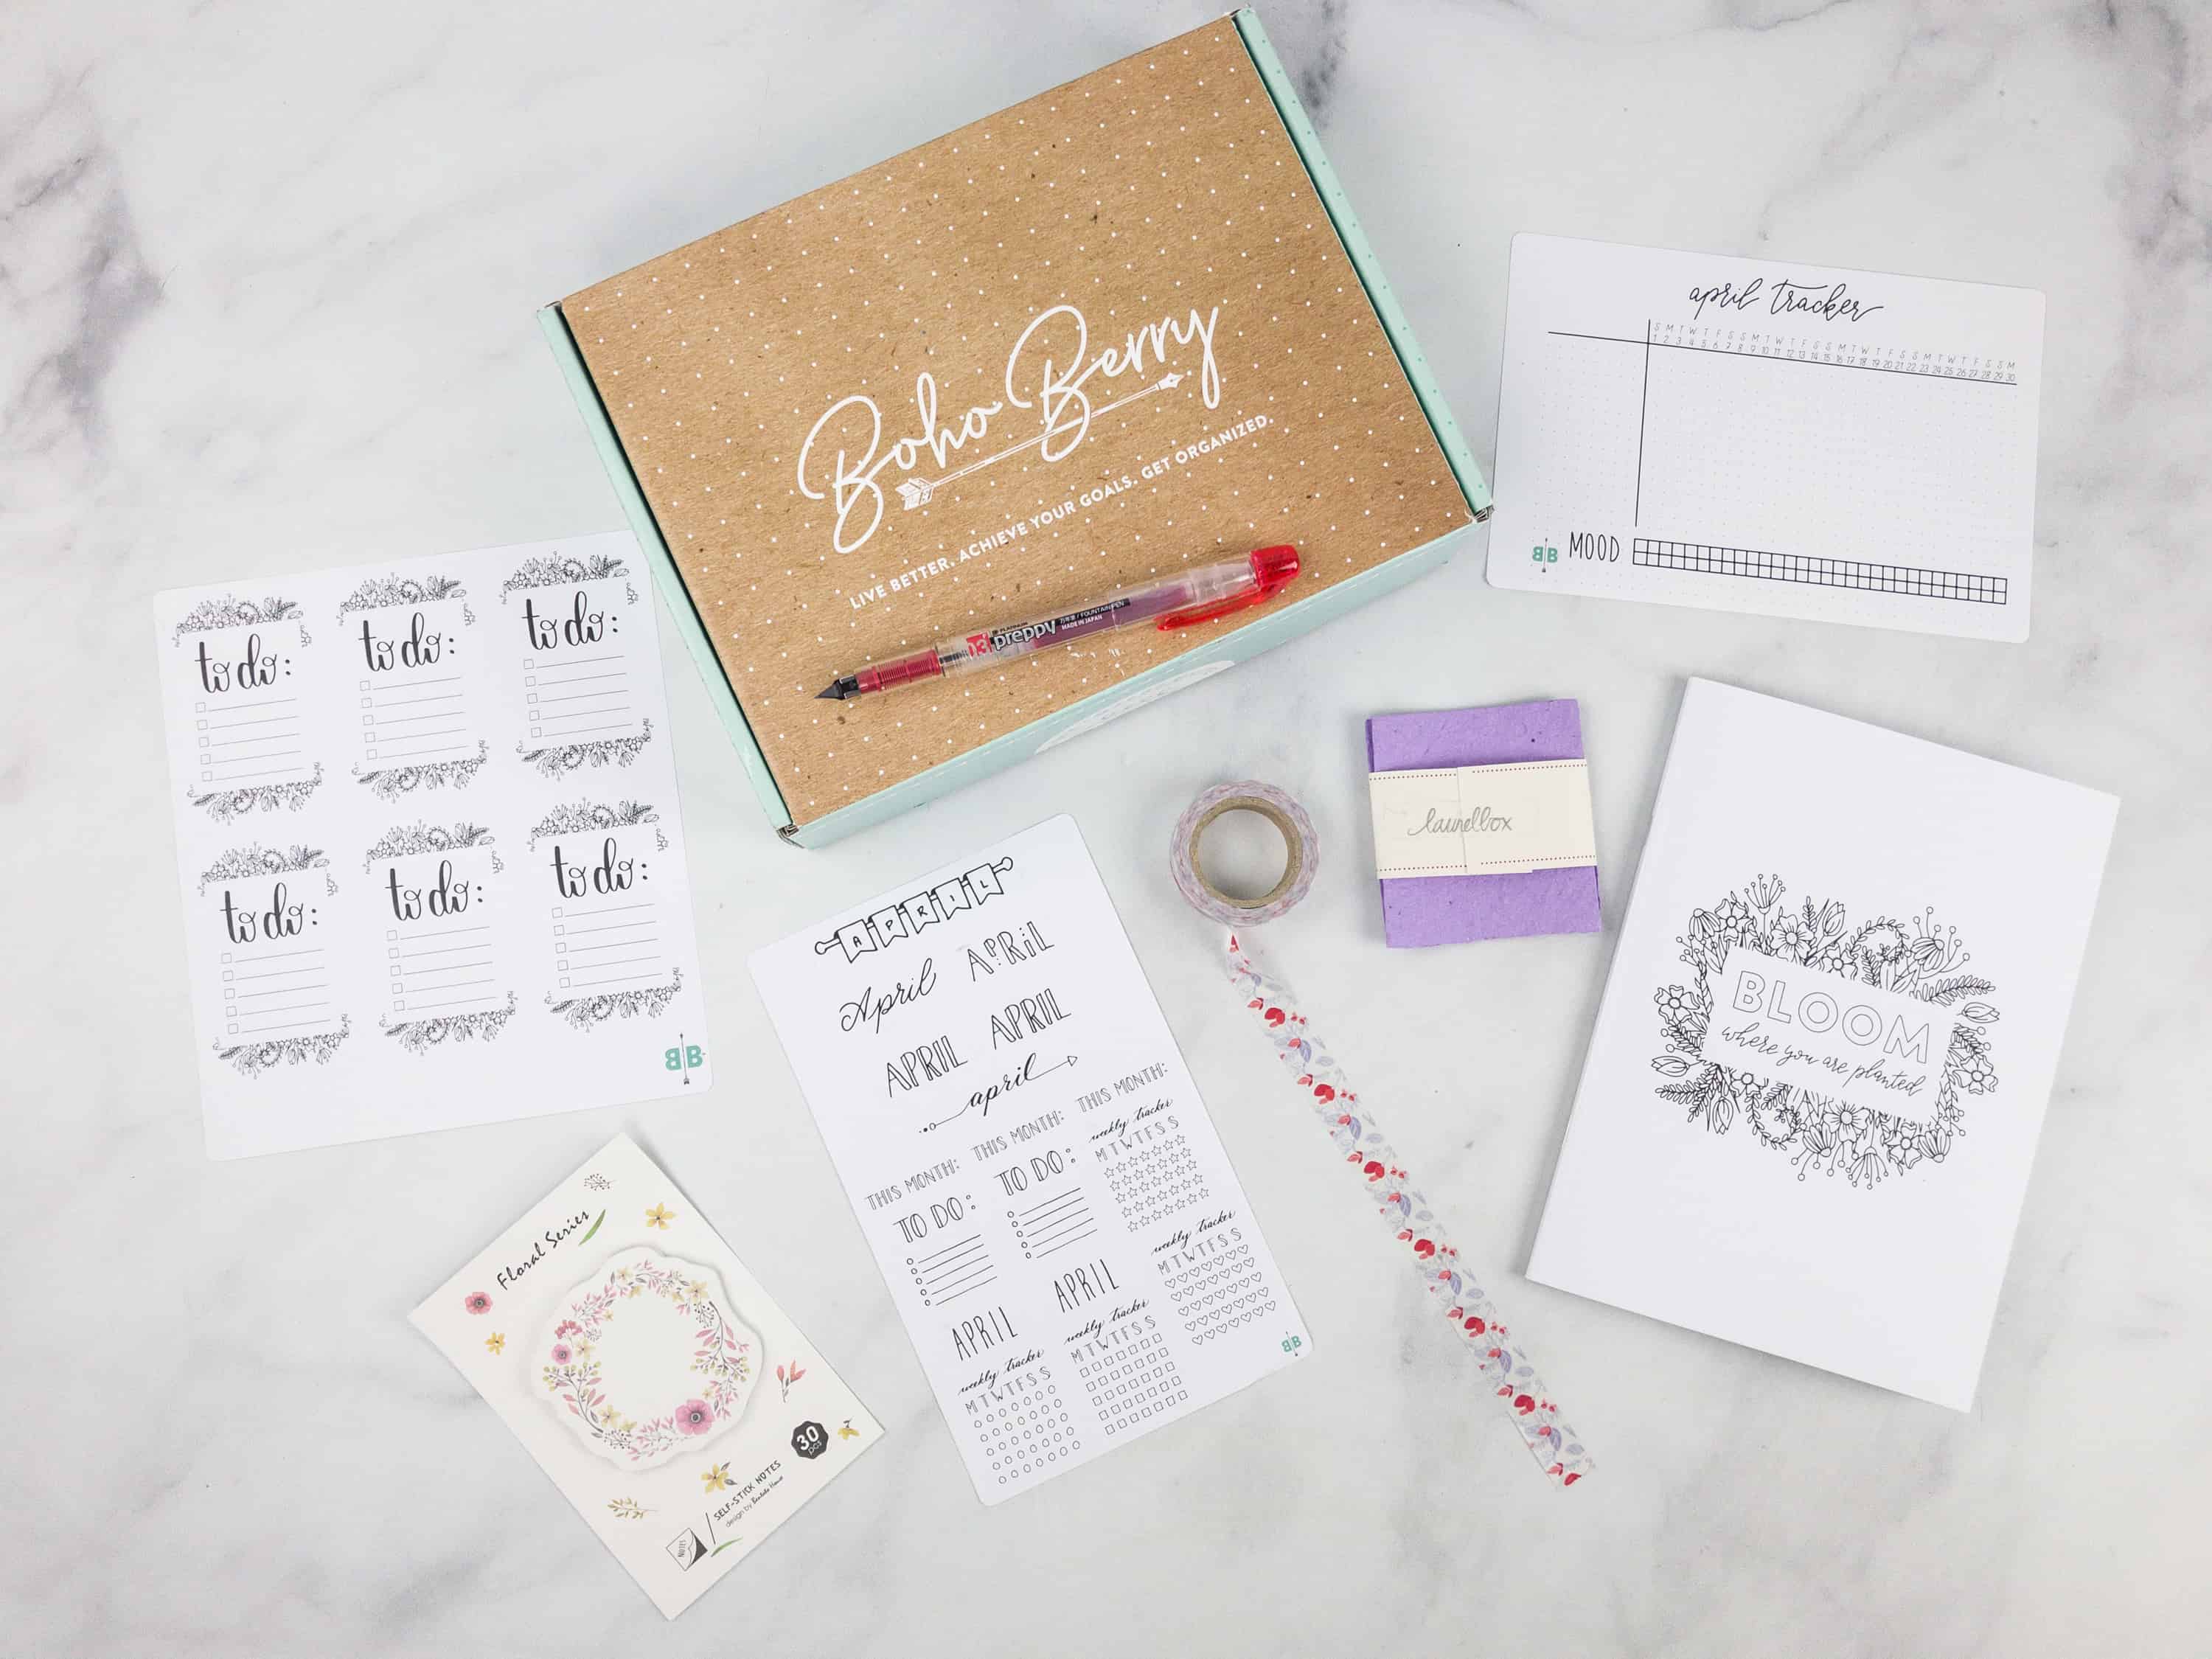 Boho Berry Box Subscription Review & Coupon - Hello Subscription